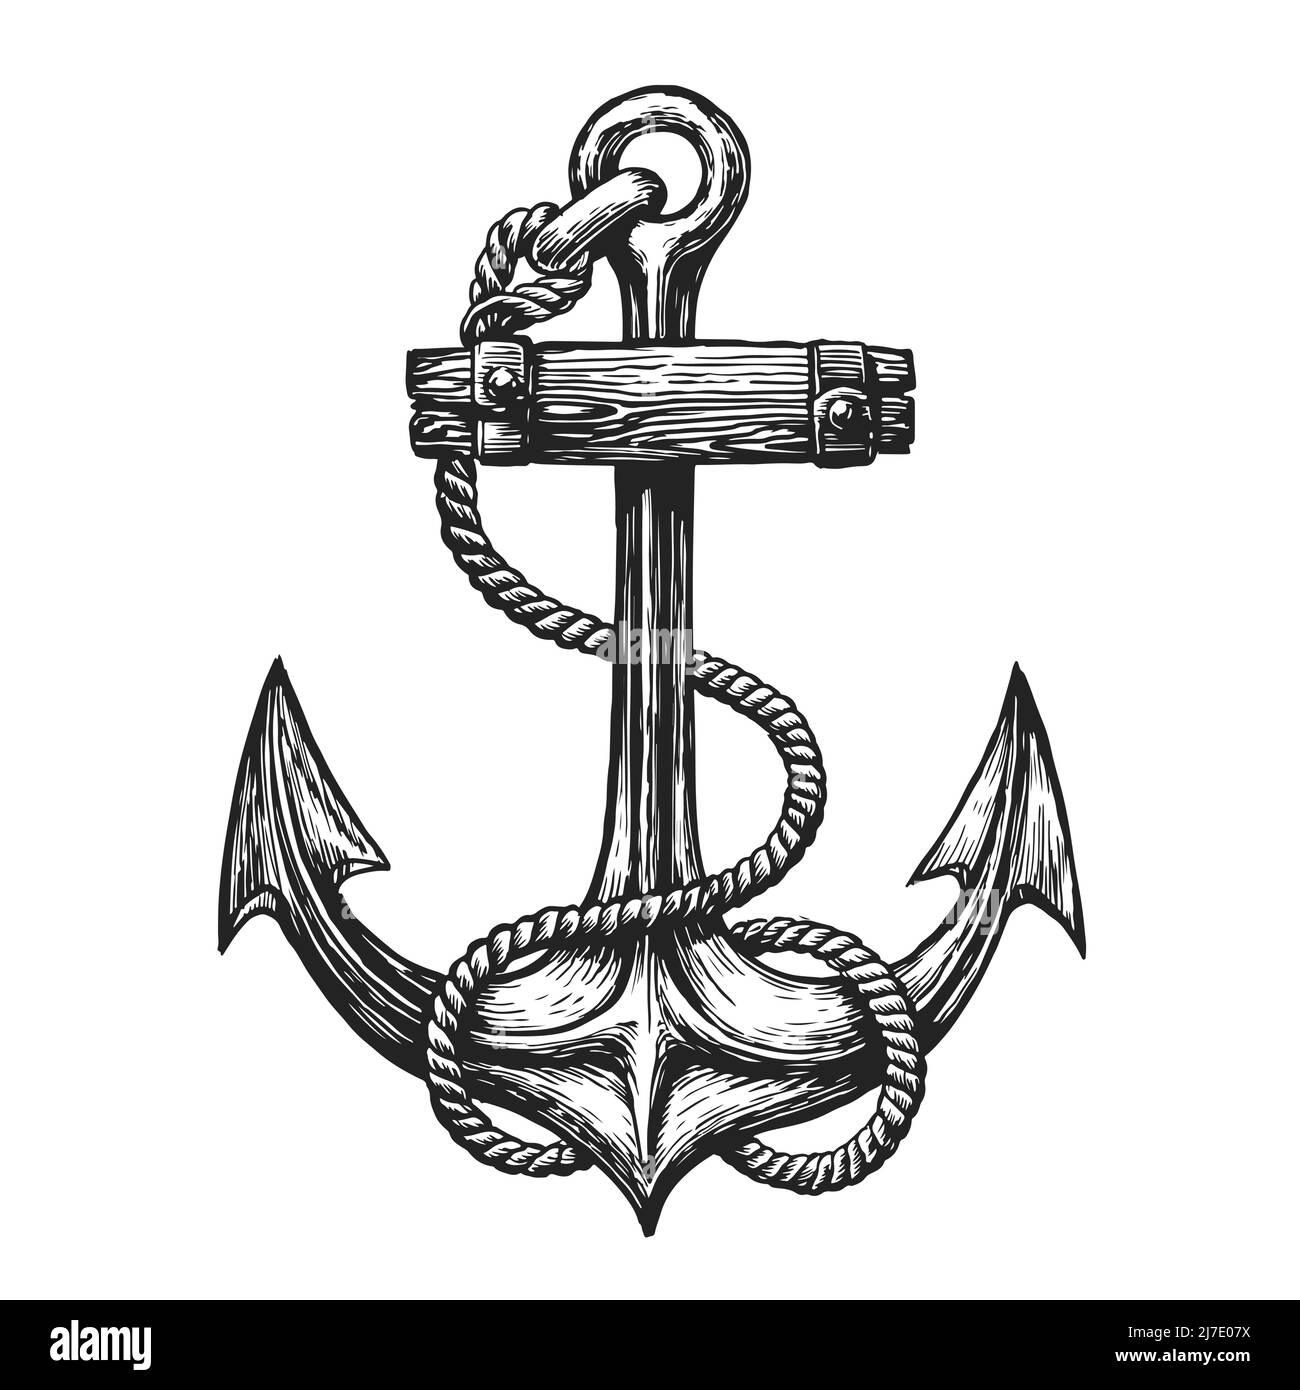 Vintage anchor with rope drawn in engraving style. Hand drawn seafaring ...